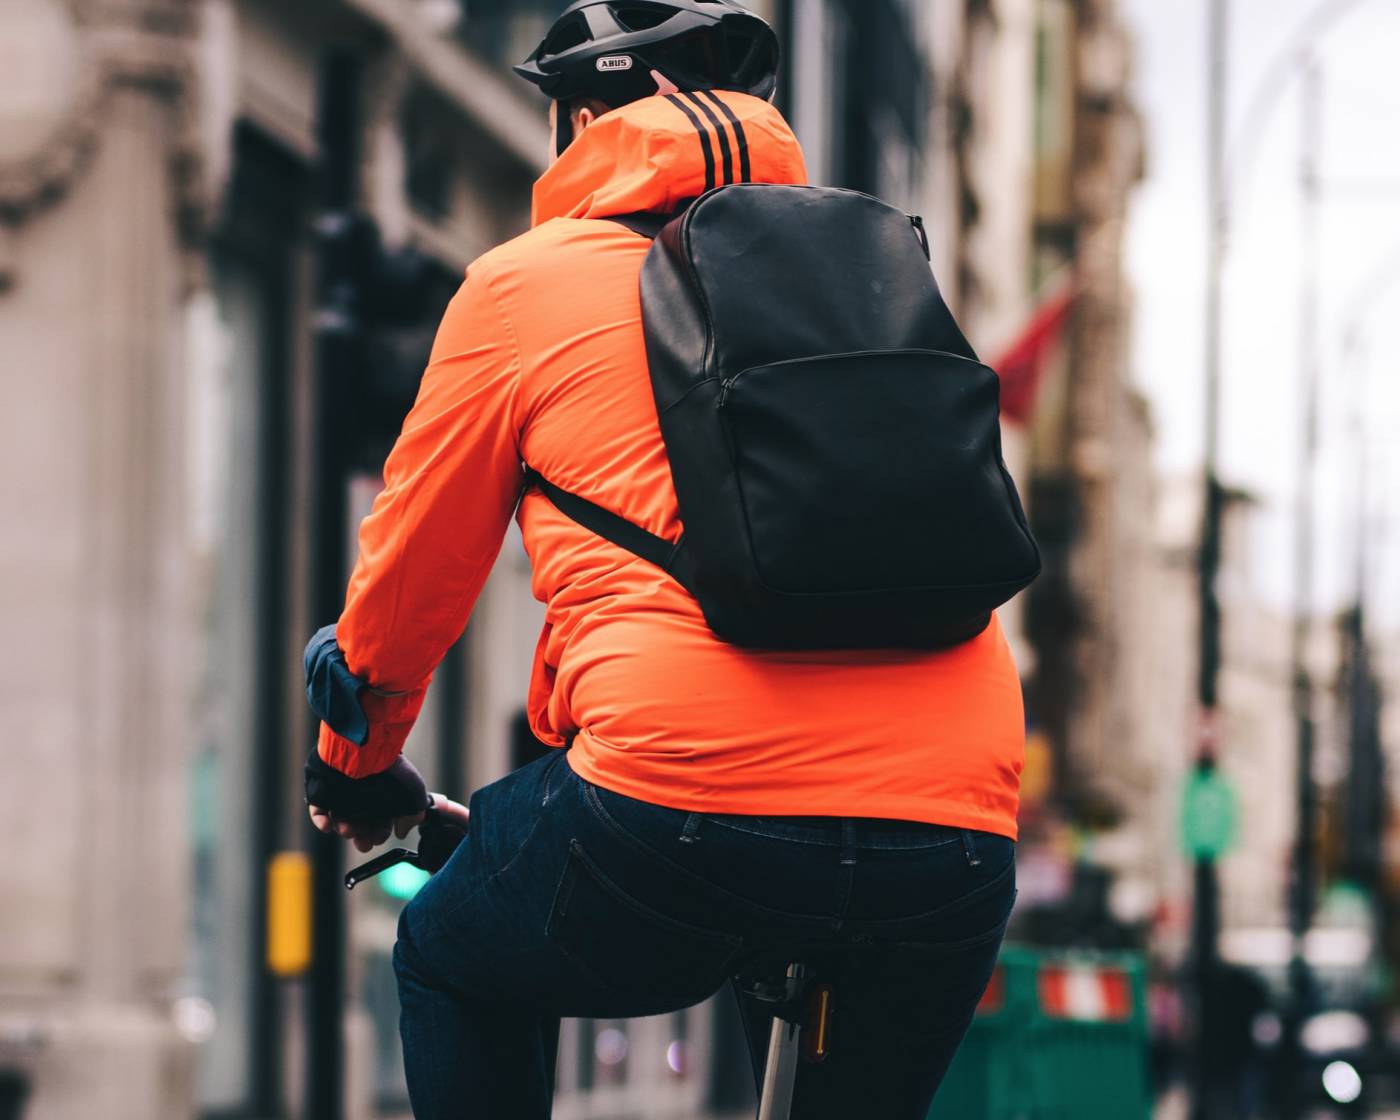 Picture of someone cycling - commuting to work by bike